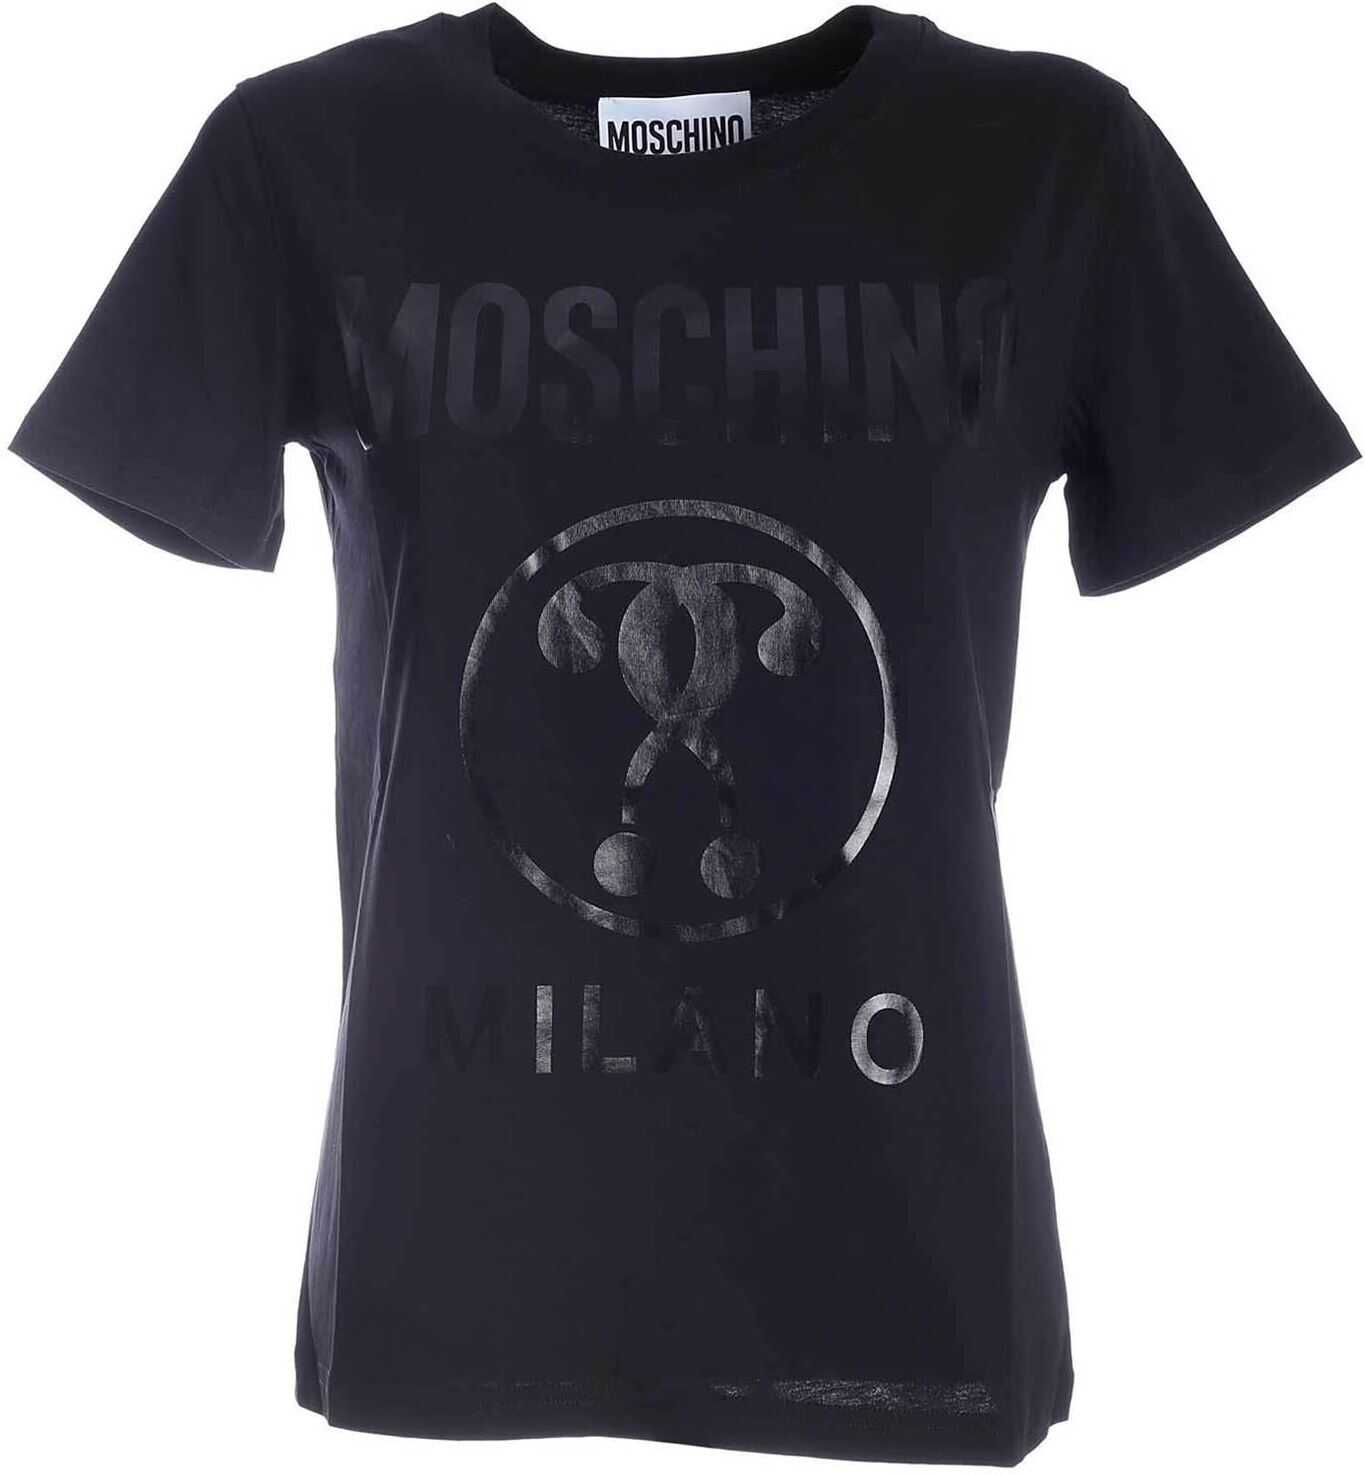 Moschino Double Question Mark T-Shirt In Black Black